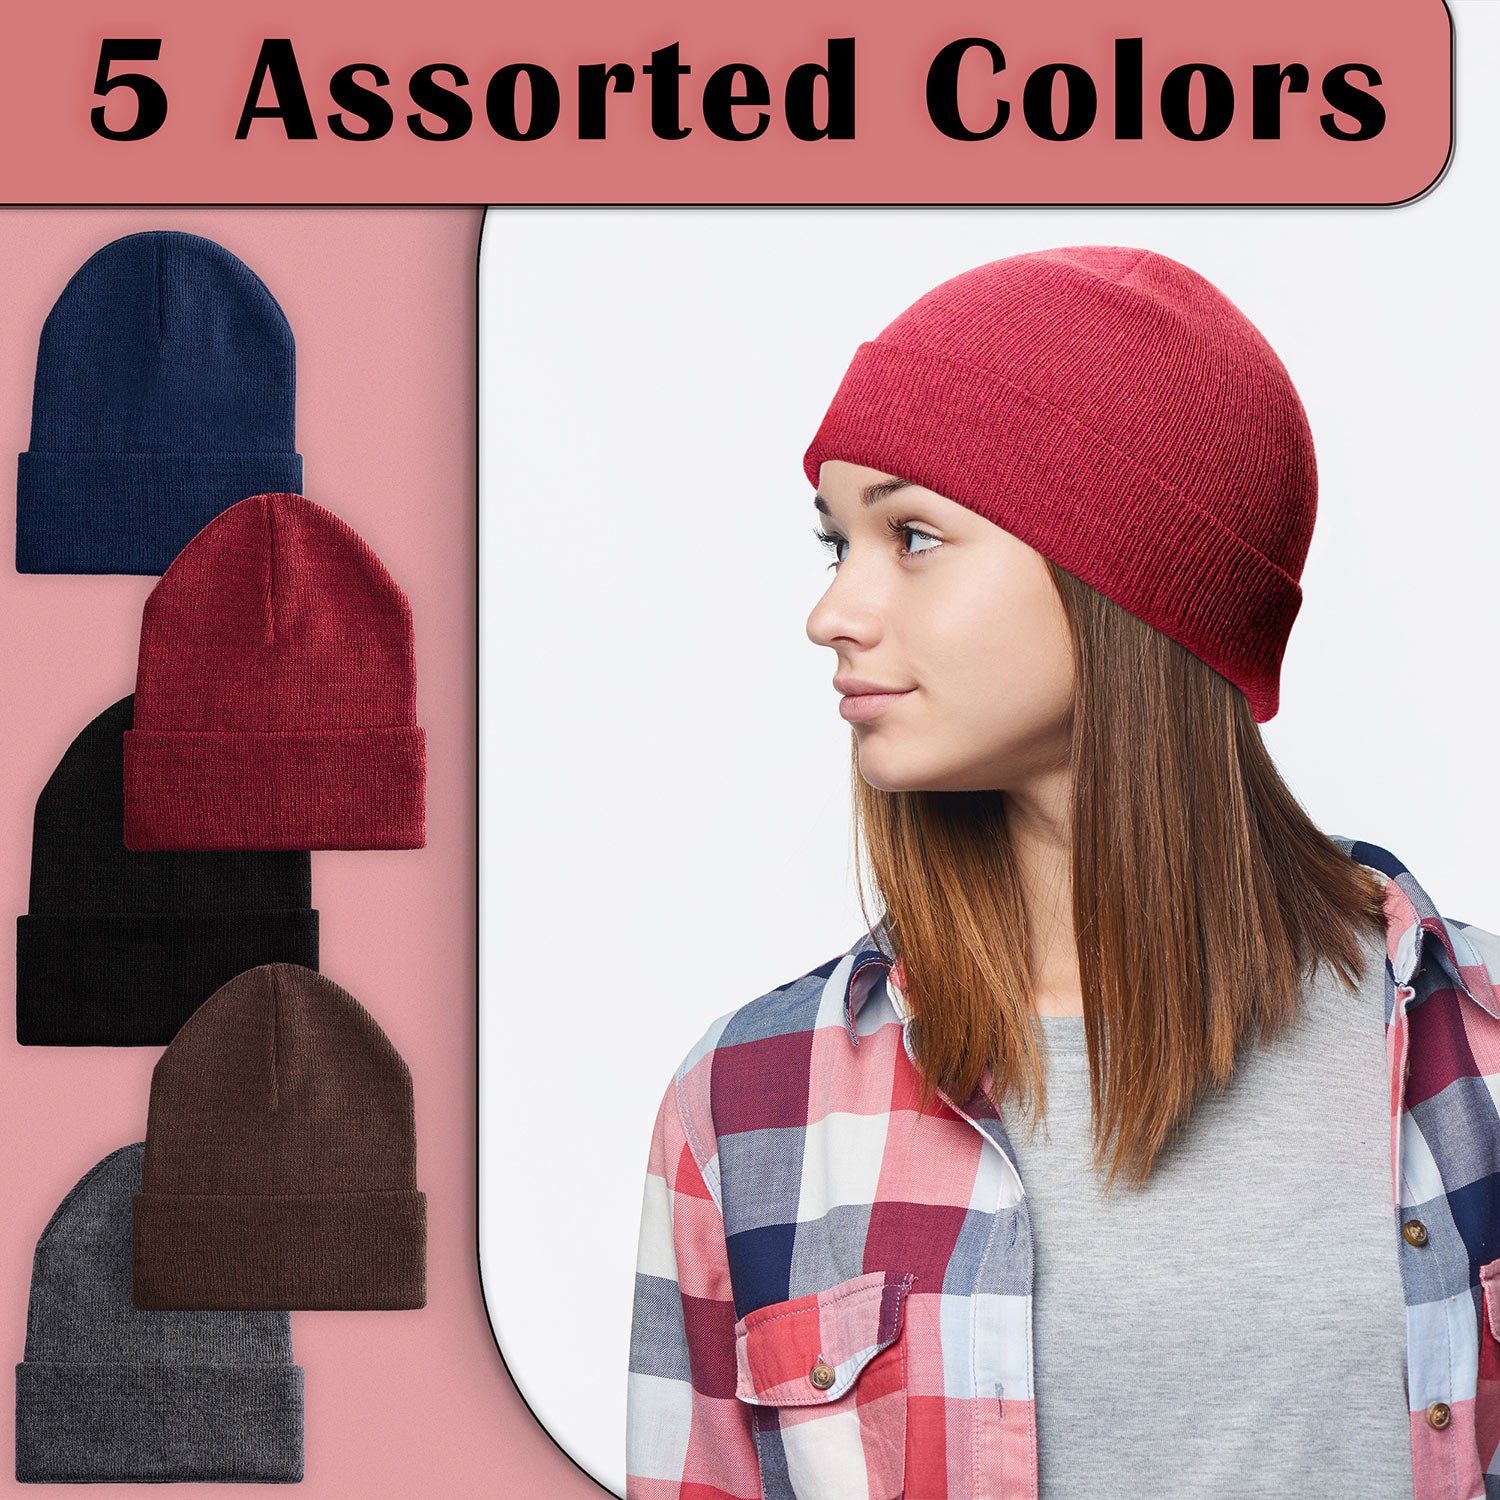 Unisex Winter Wholesale Beanie in 5 Assorted Colors - Bulk Case of 48 Hats